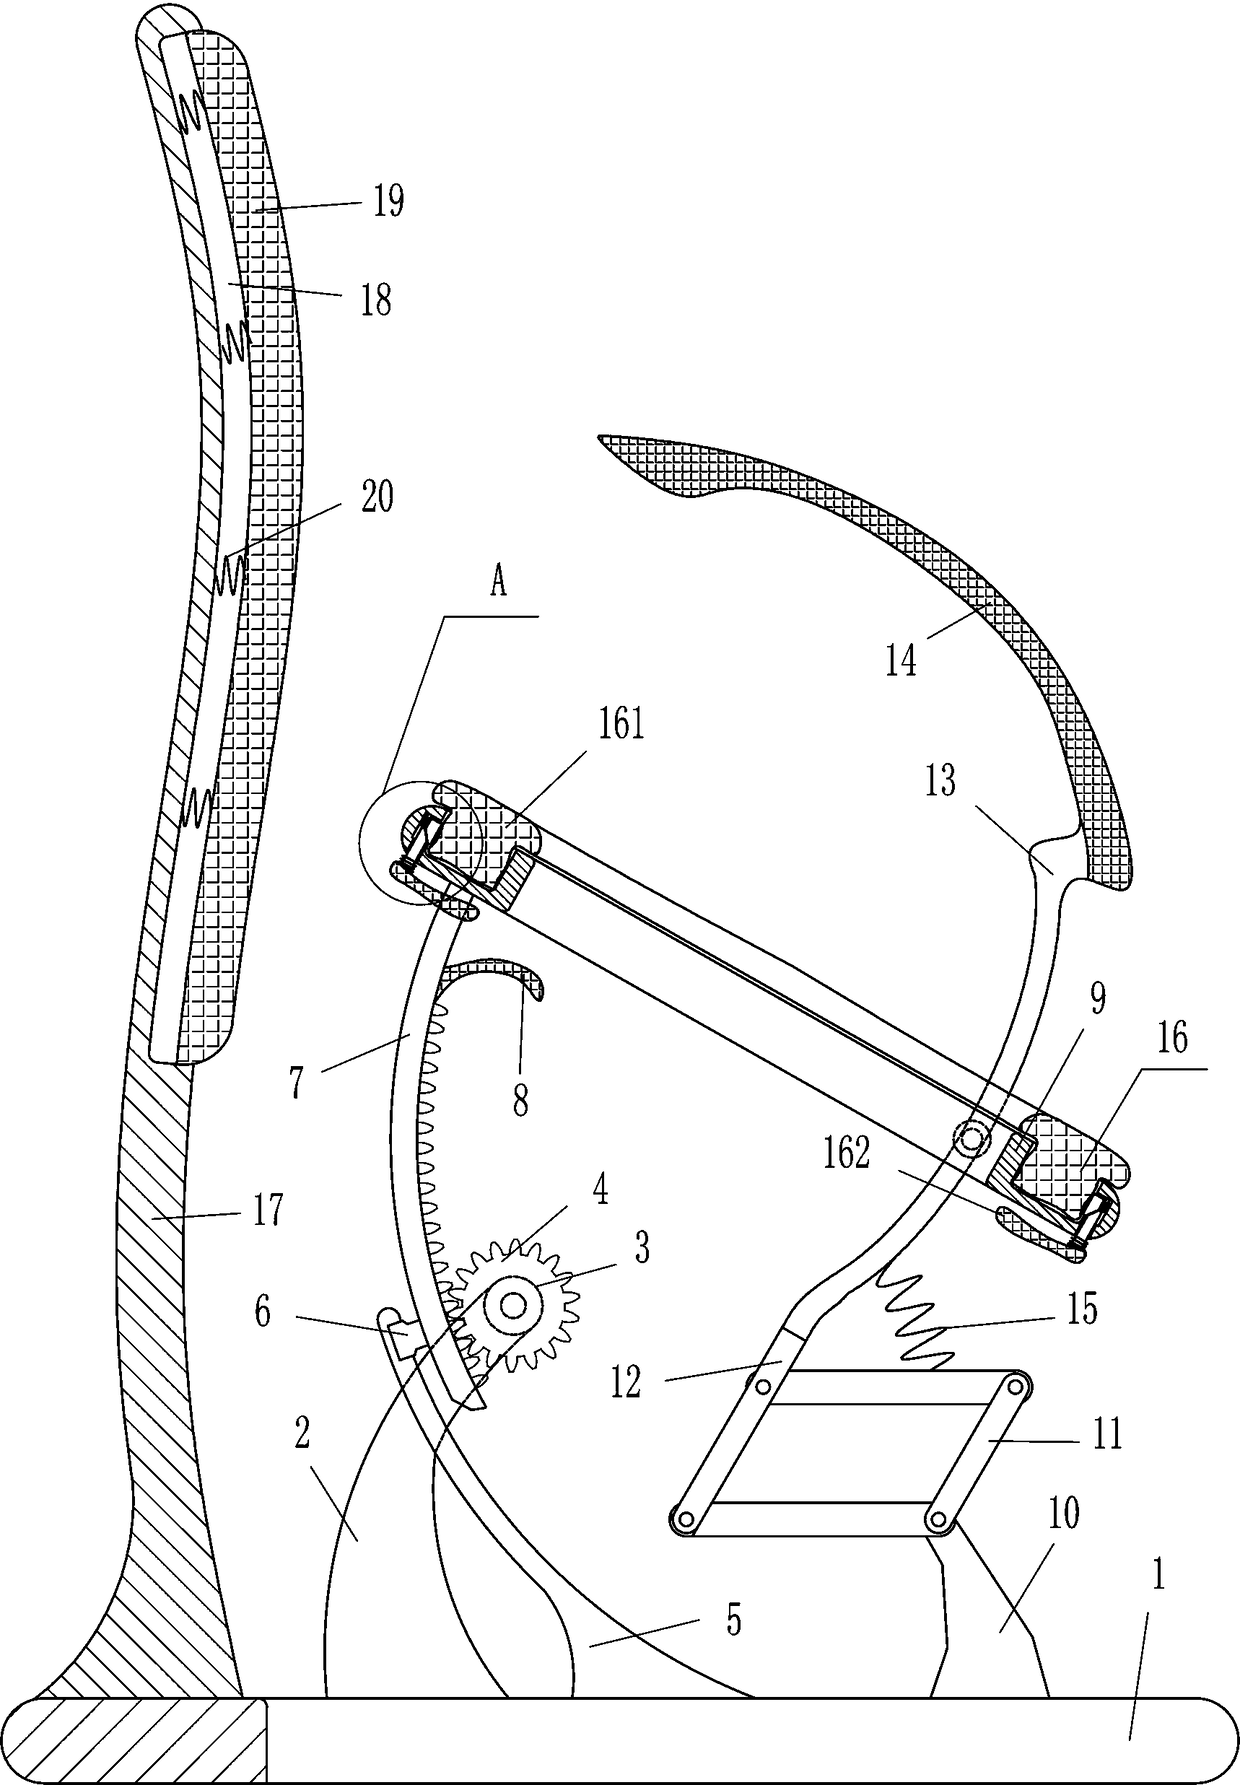 Auxiliary frame for pregnant women to use squatting pan